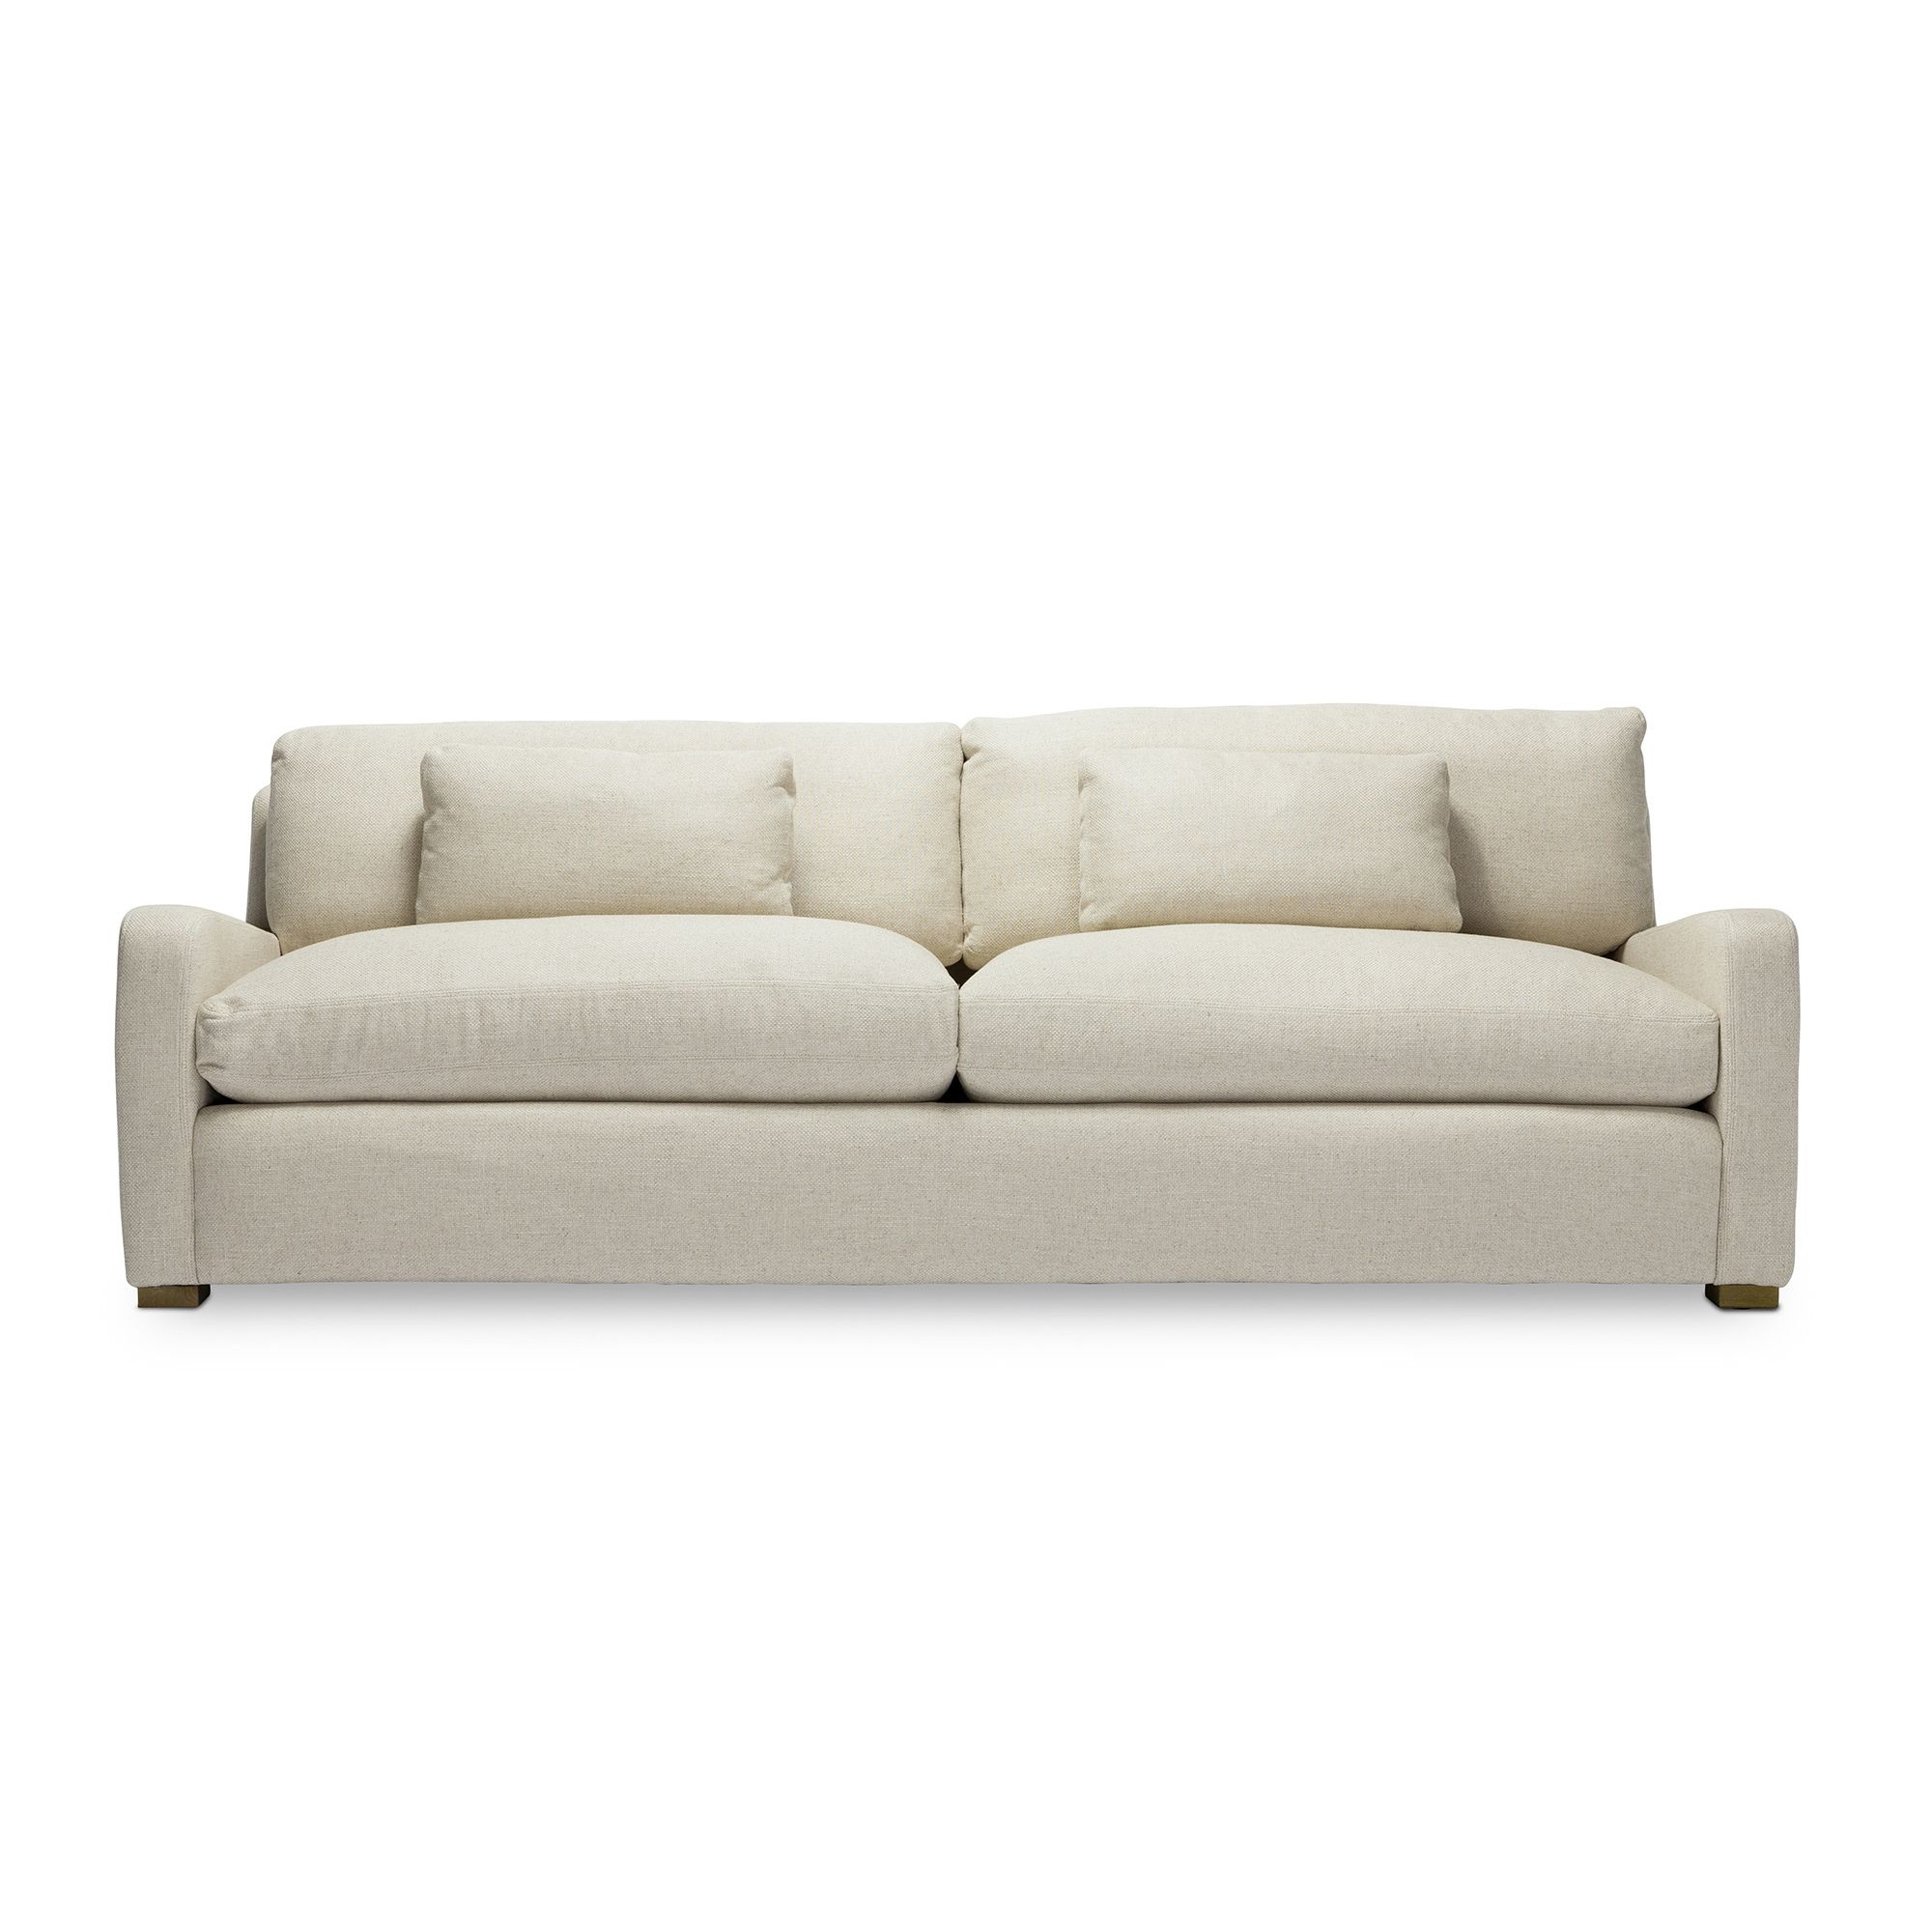 Stratten Slope Arm Sofa With Regard To Loft Arm Sofa Chairs (View 17 of 25)